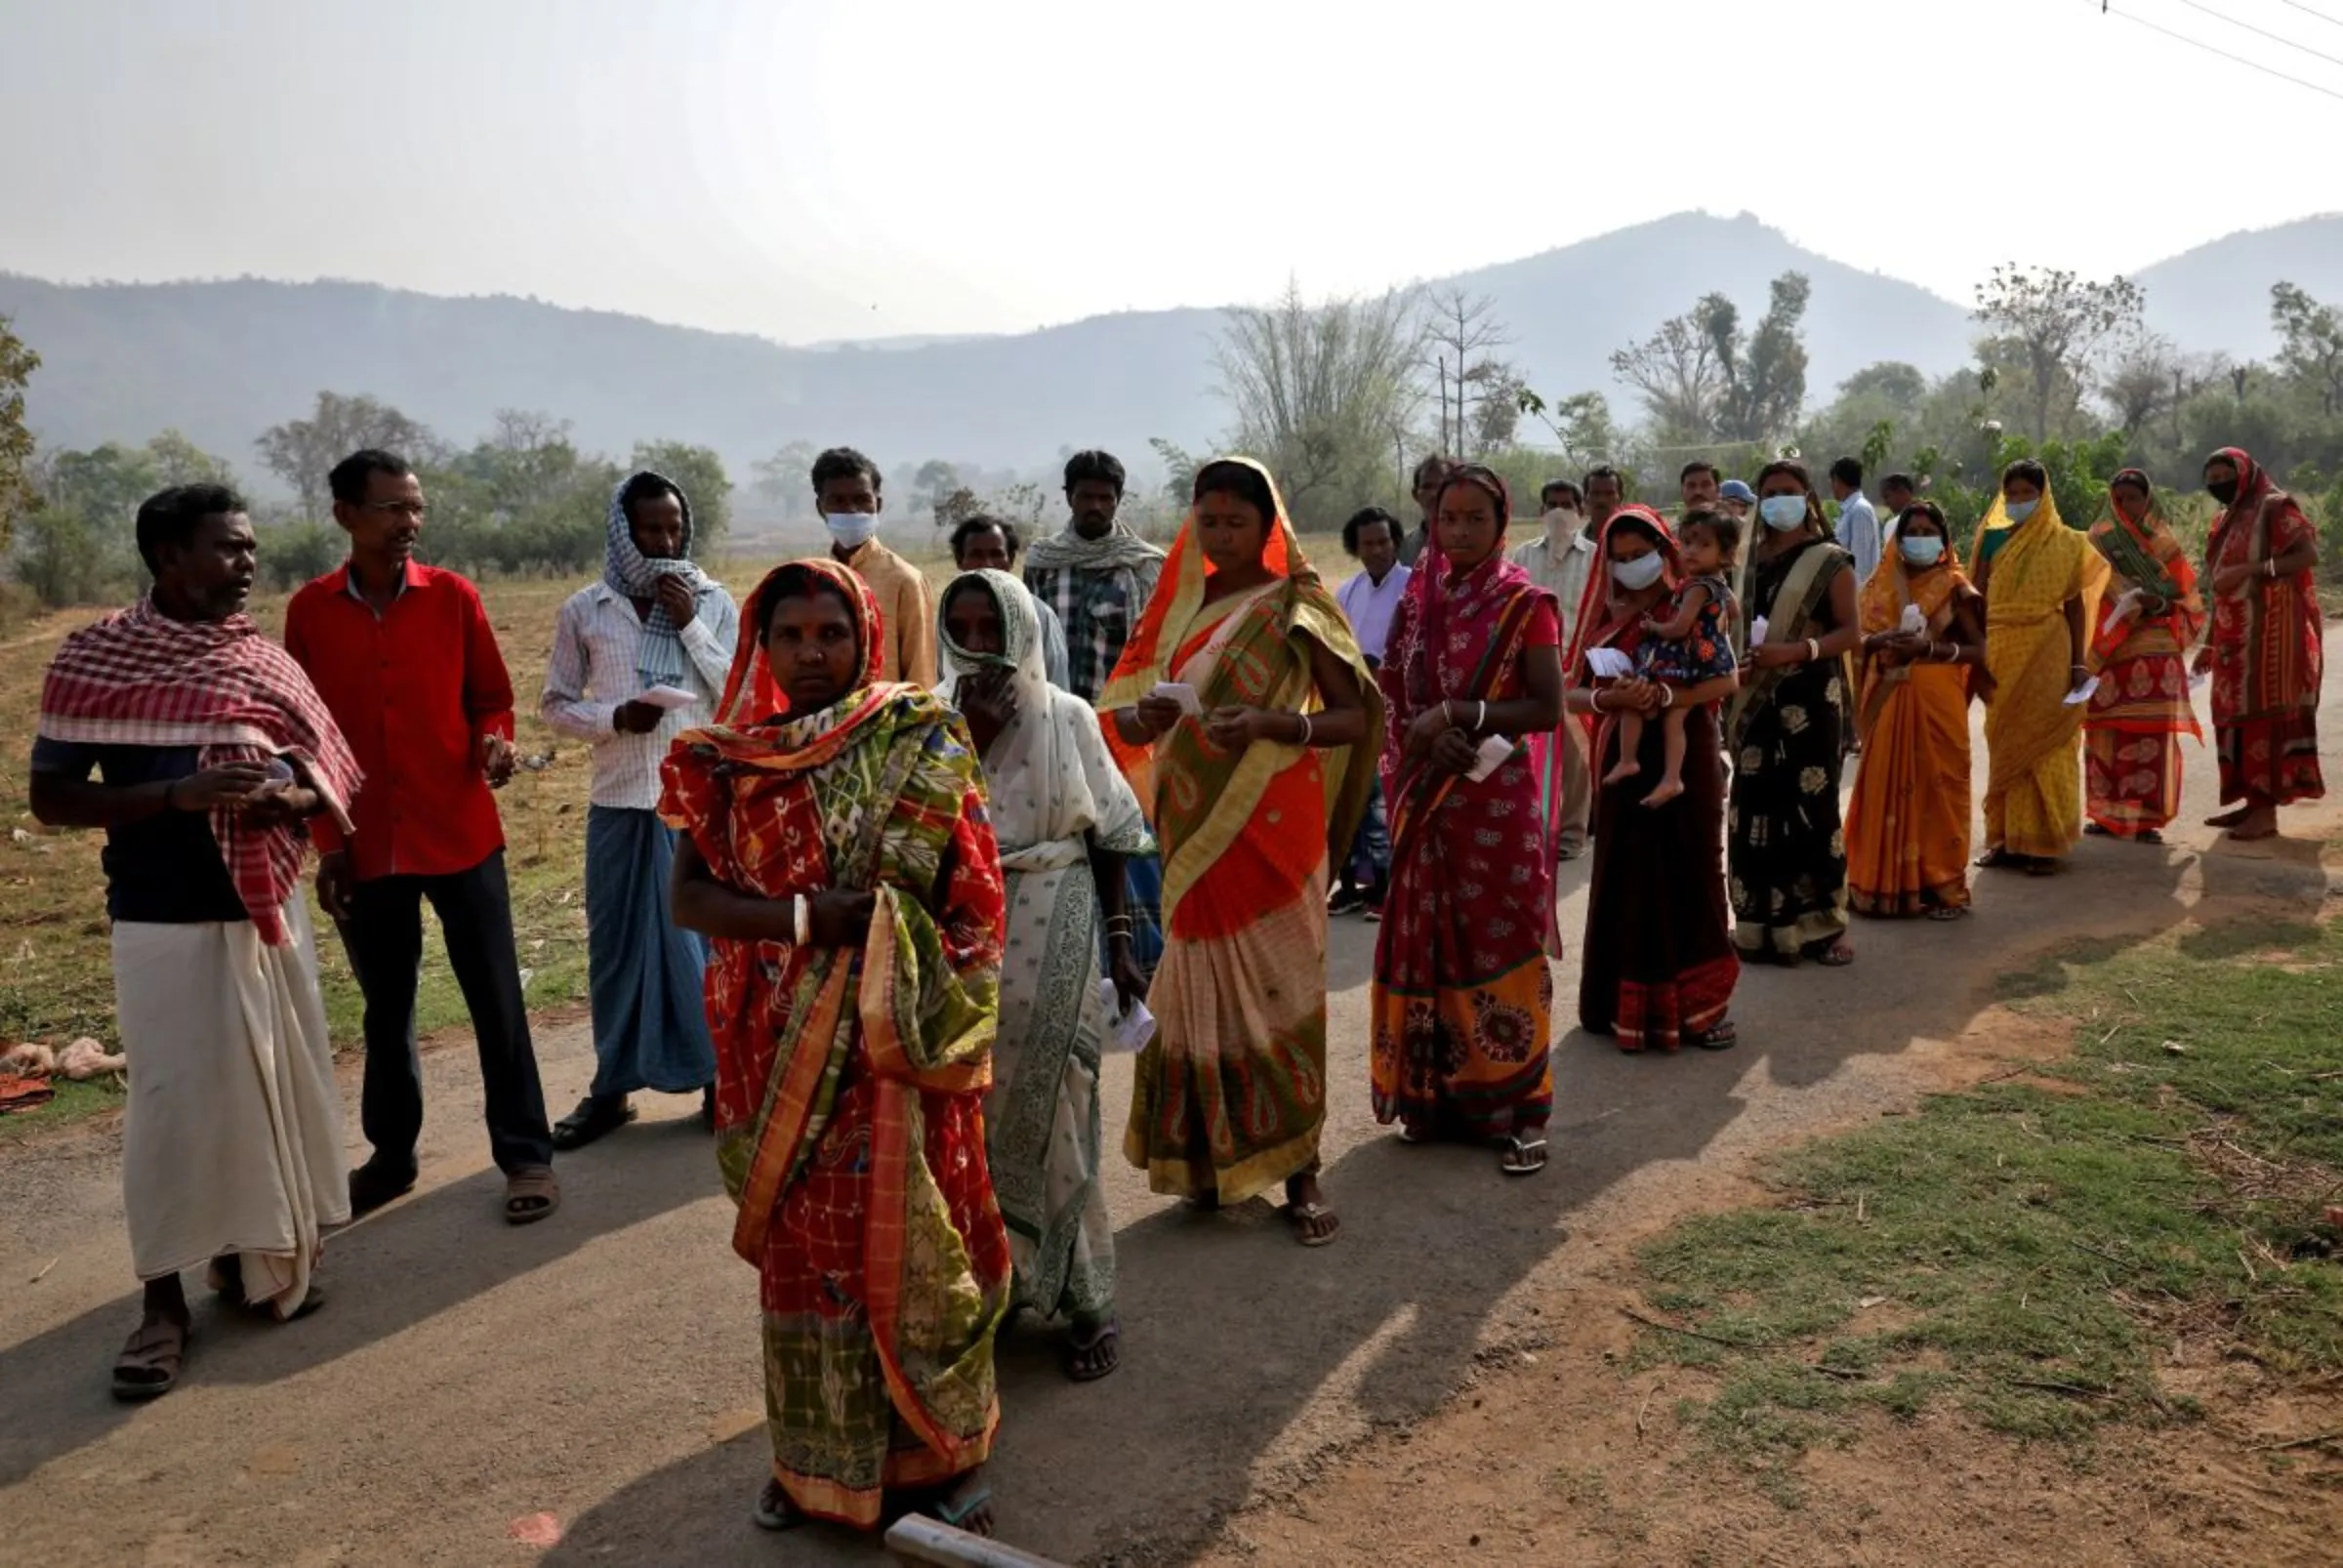 People wait in lines to cast their vote outside a polling station in the Purulia district, India, March 27, 2021. REUTERS/Rupak De Chowdhuri